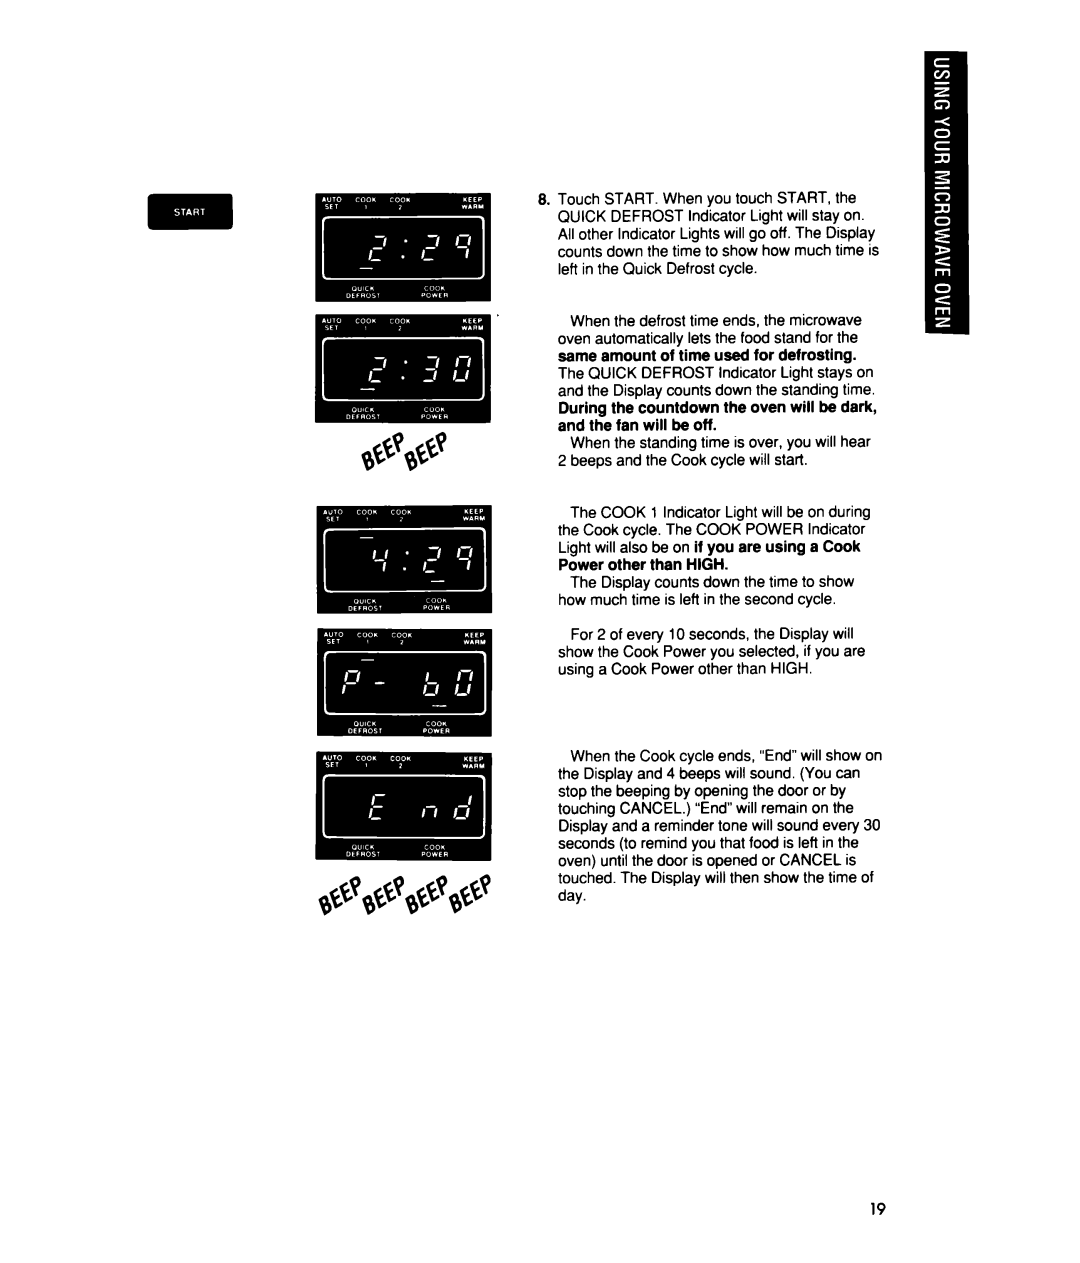 Whirlpool MTZ080XY user manual When the standing time is over, you will hear 